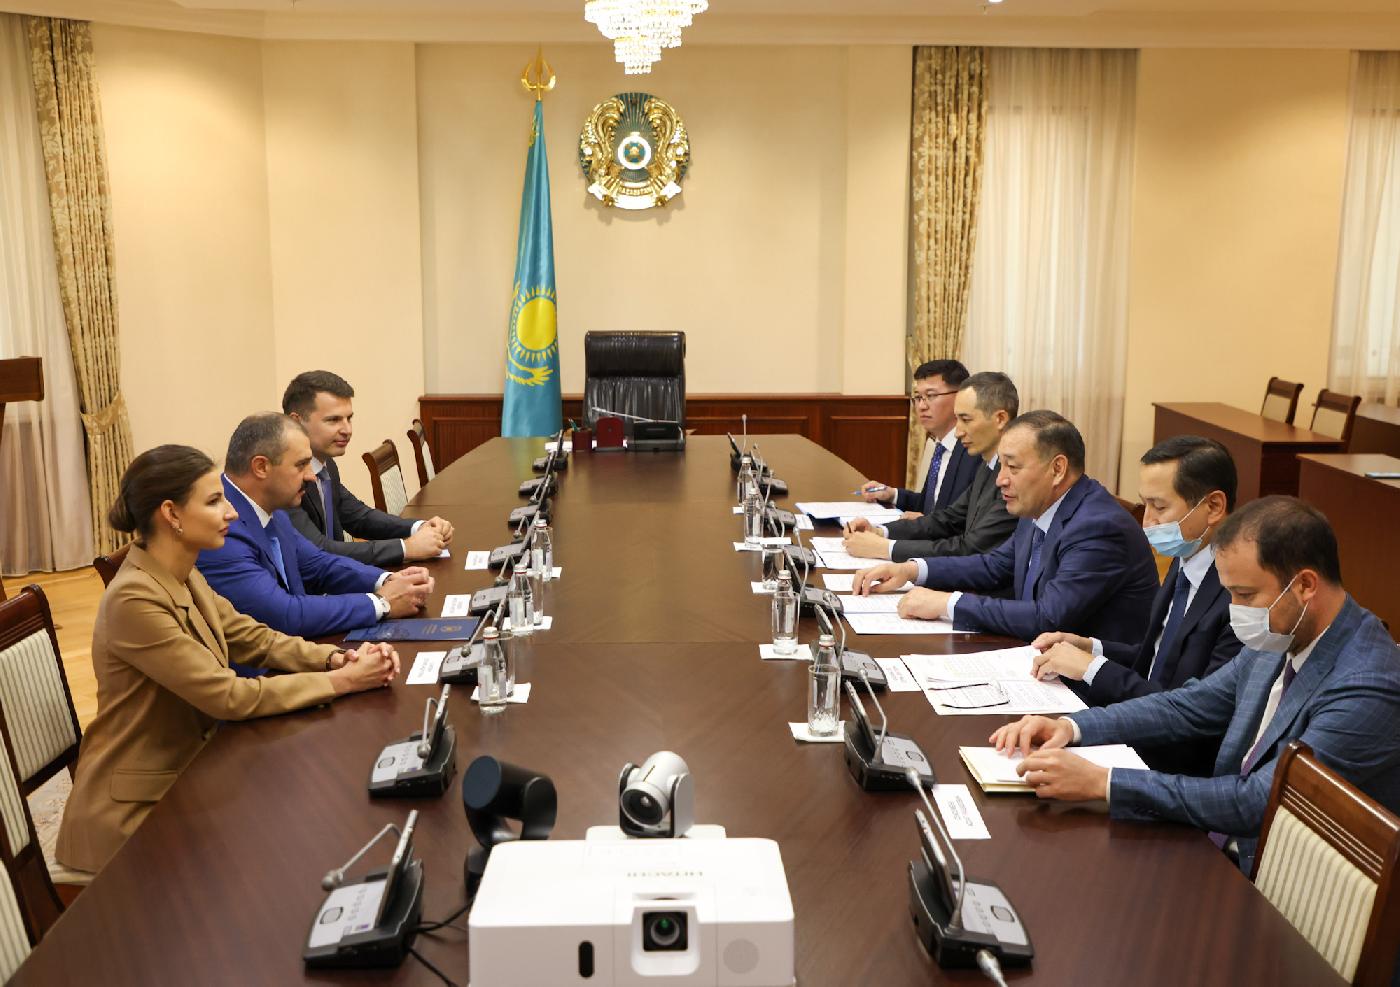 NOC president hails cooperation with Kazakhstan as vibrant